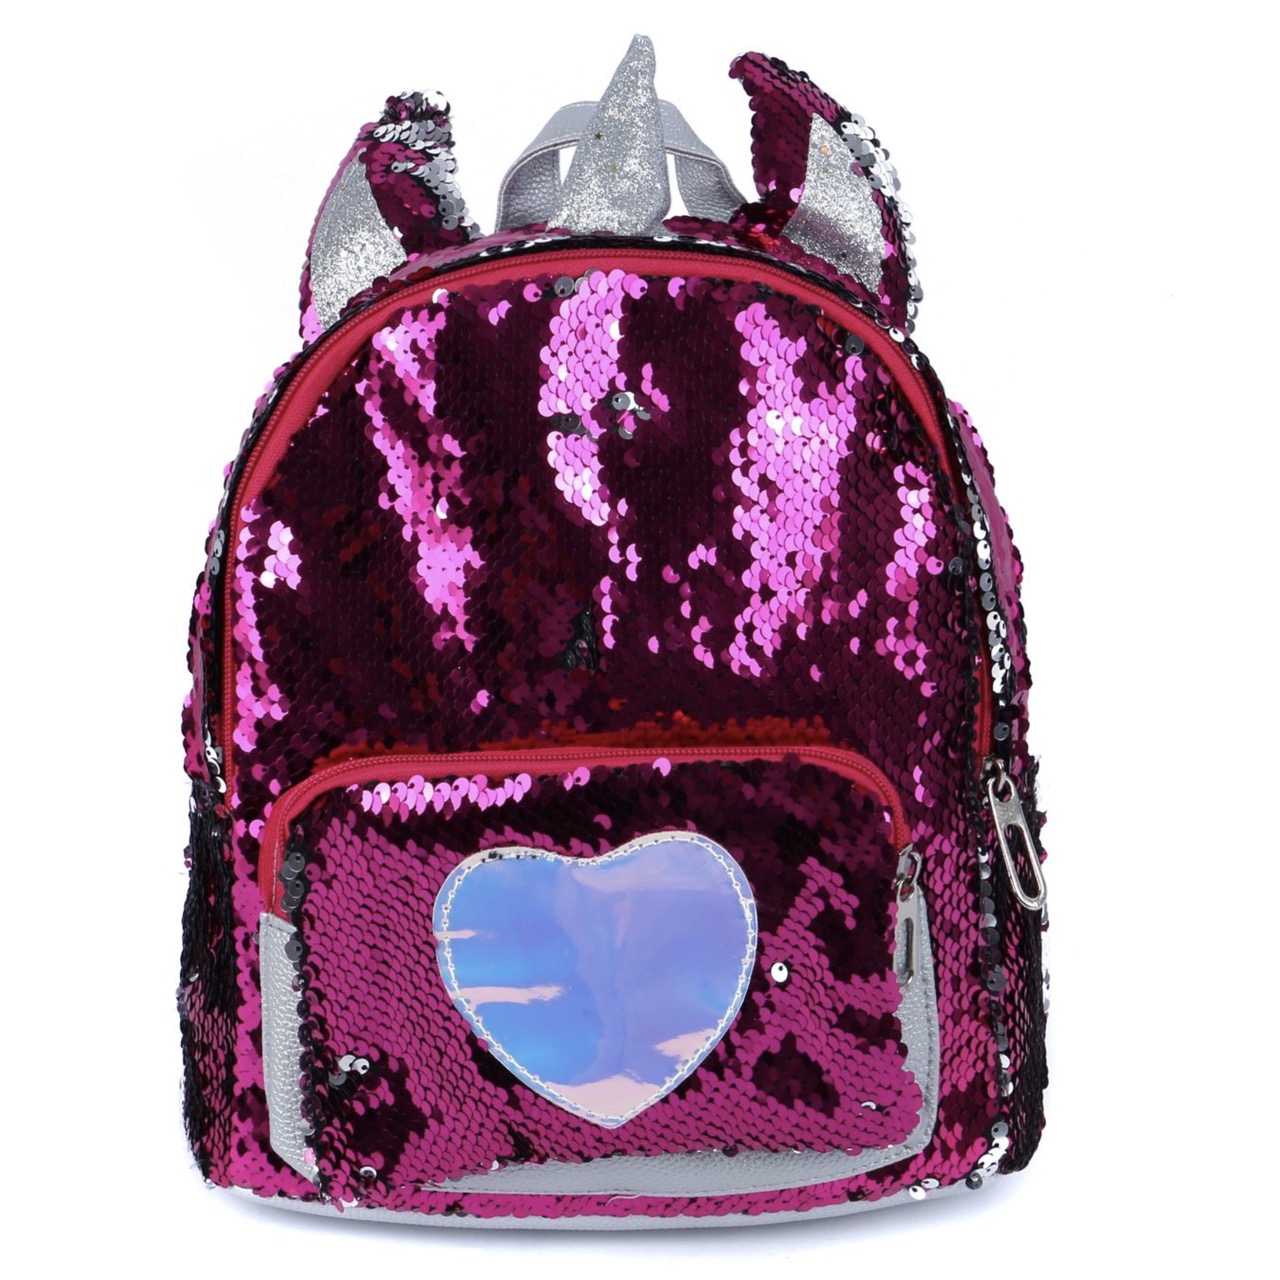 Sequin Backpack with Heart - LEPUS Gift Shops